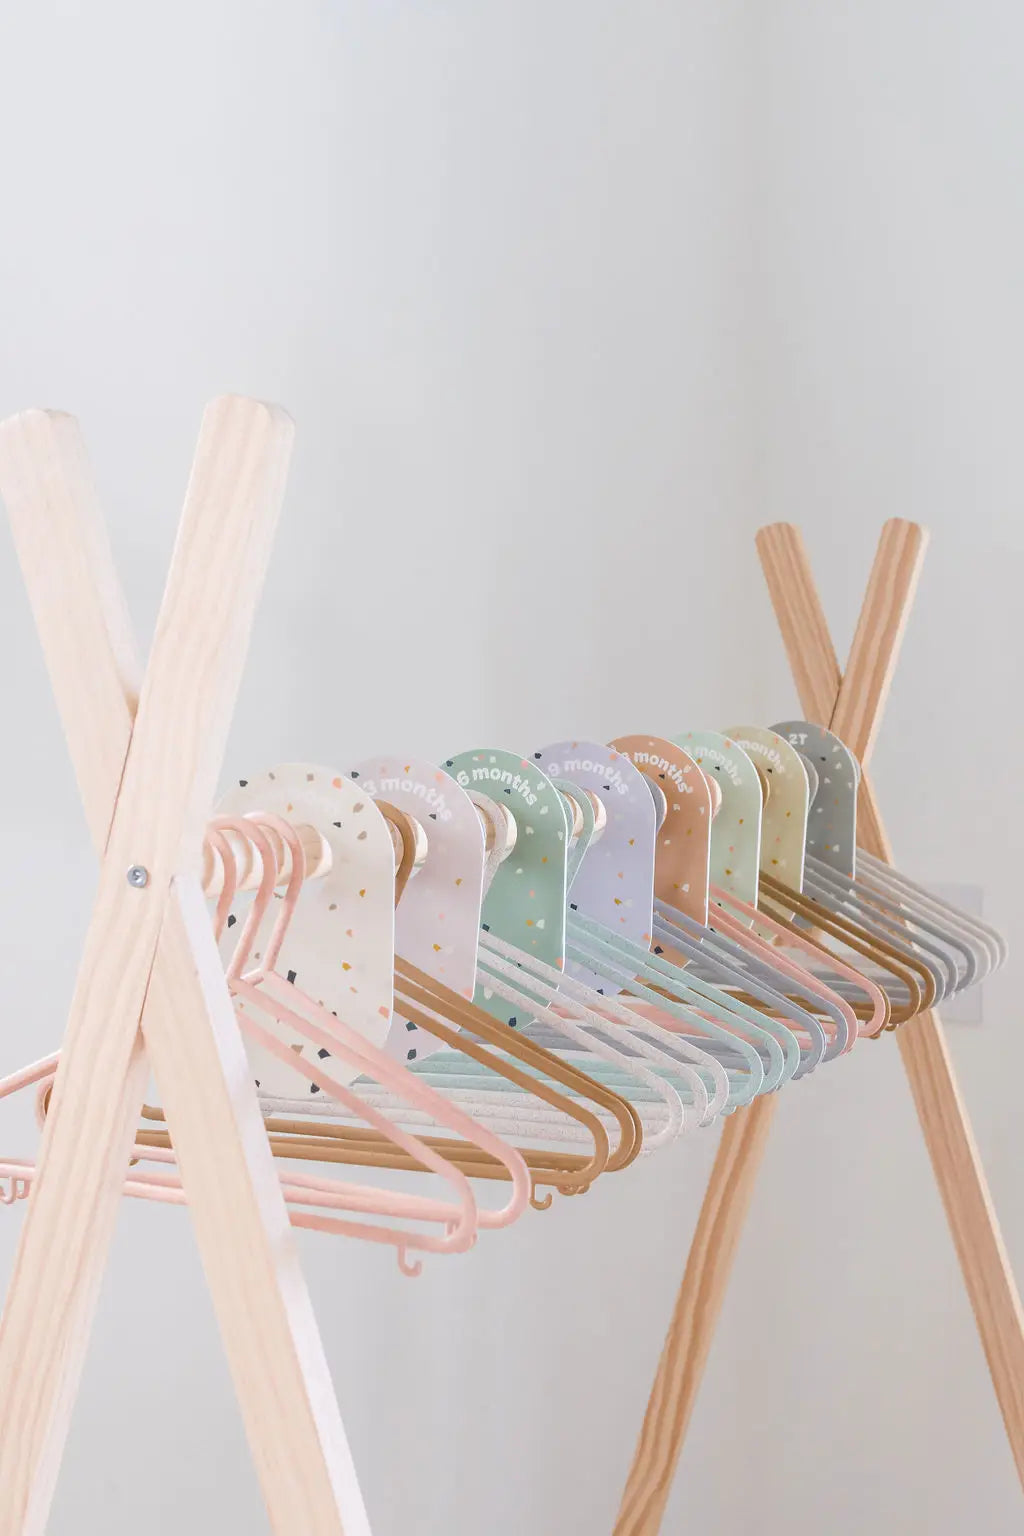 Wheat Straw Hangers - Speckled Grey